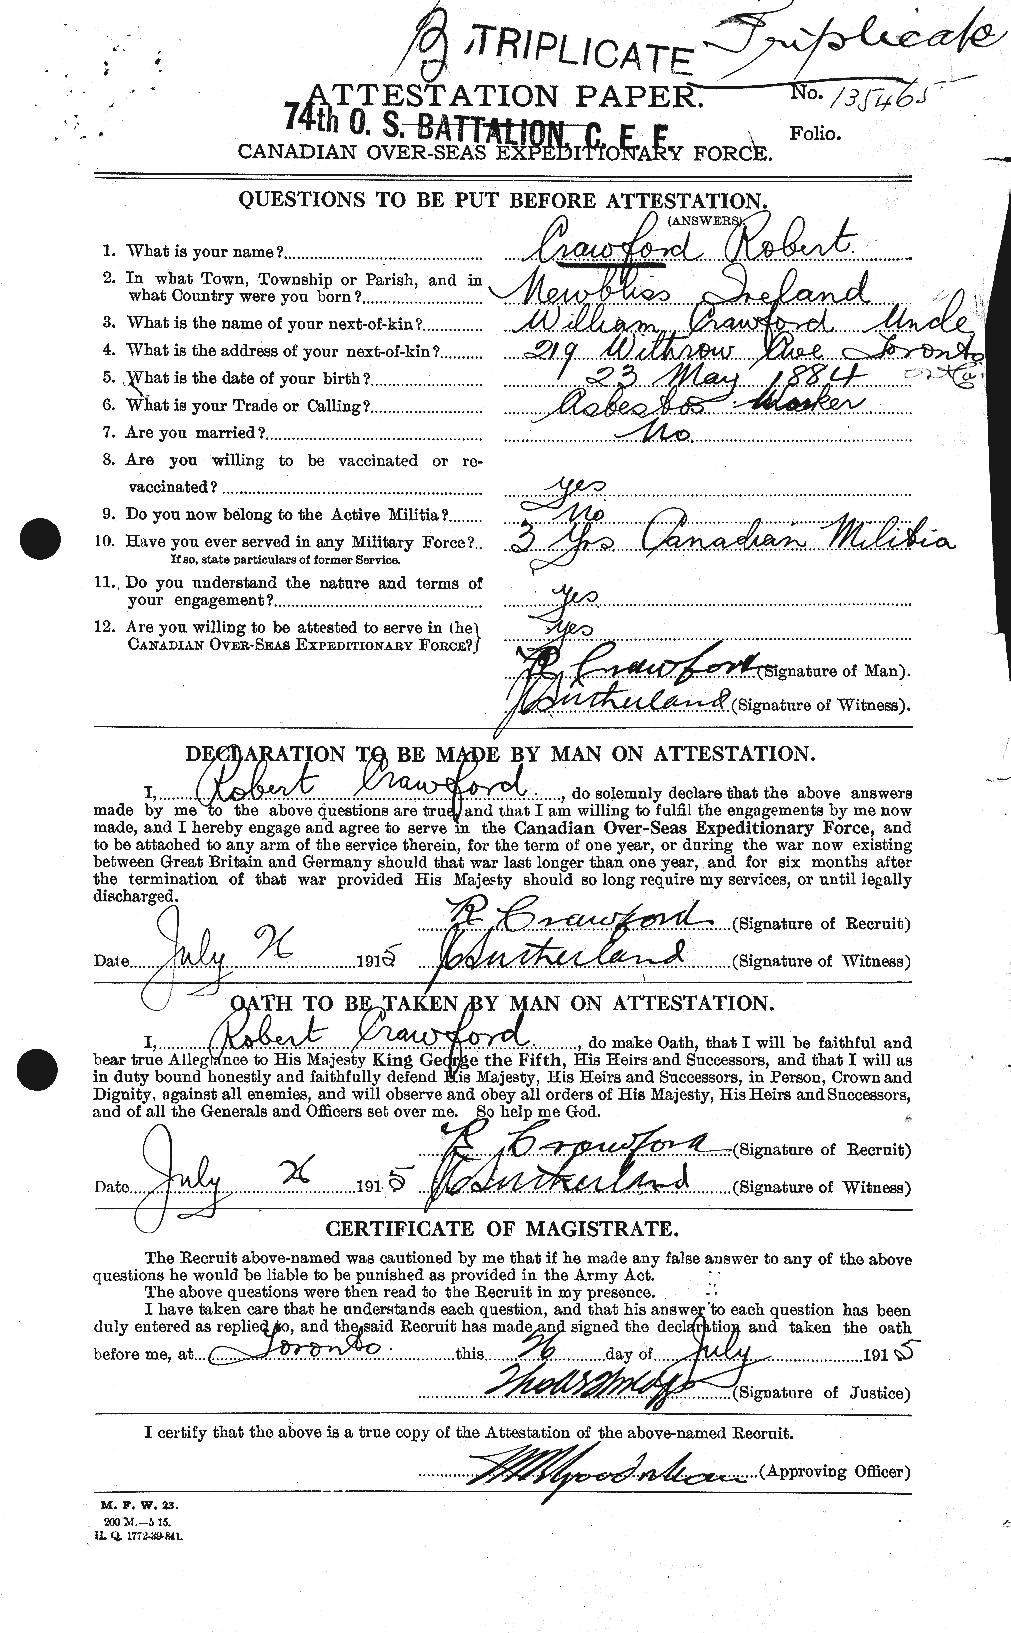 Personnel Records of the First World War - CEF 061635a